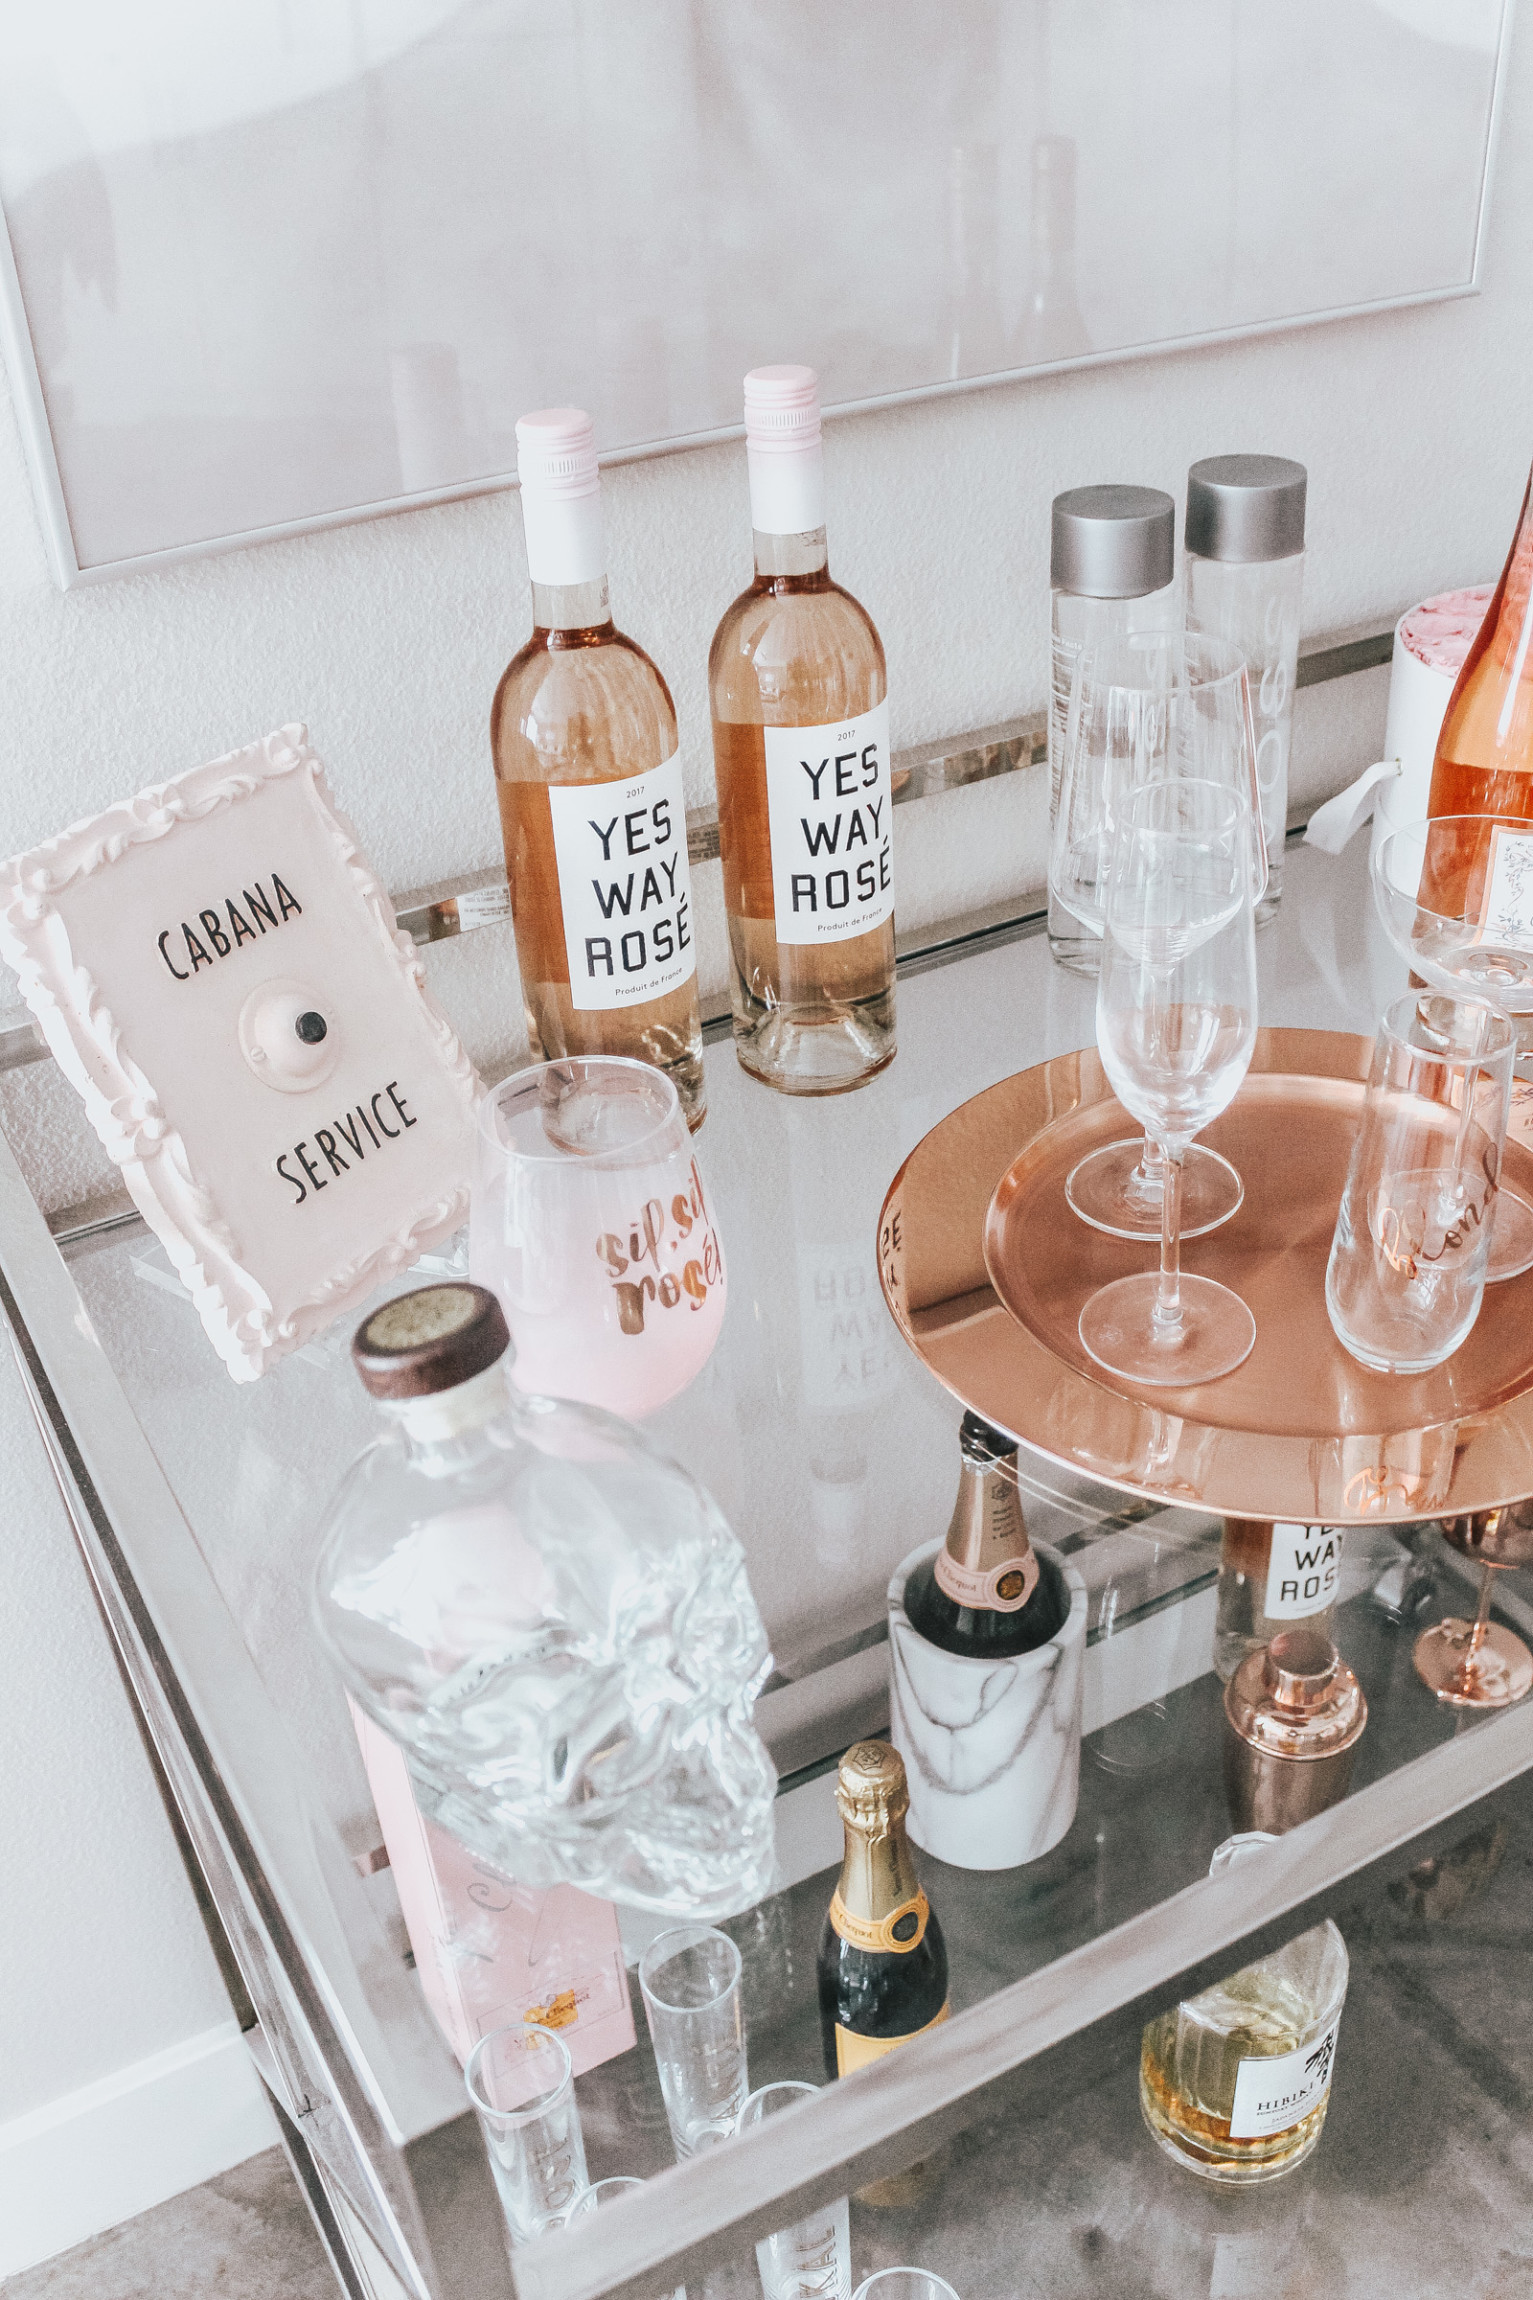 Chic Rosé Bart Cart | Marilyn Monroe Bubble Gum | Bar Cart Styling | Cabana Service | Home Decor | Rosé & White Cart Cart | Blondie in the City by Hayley Larue